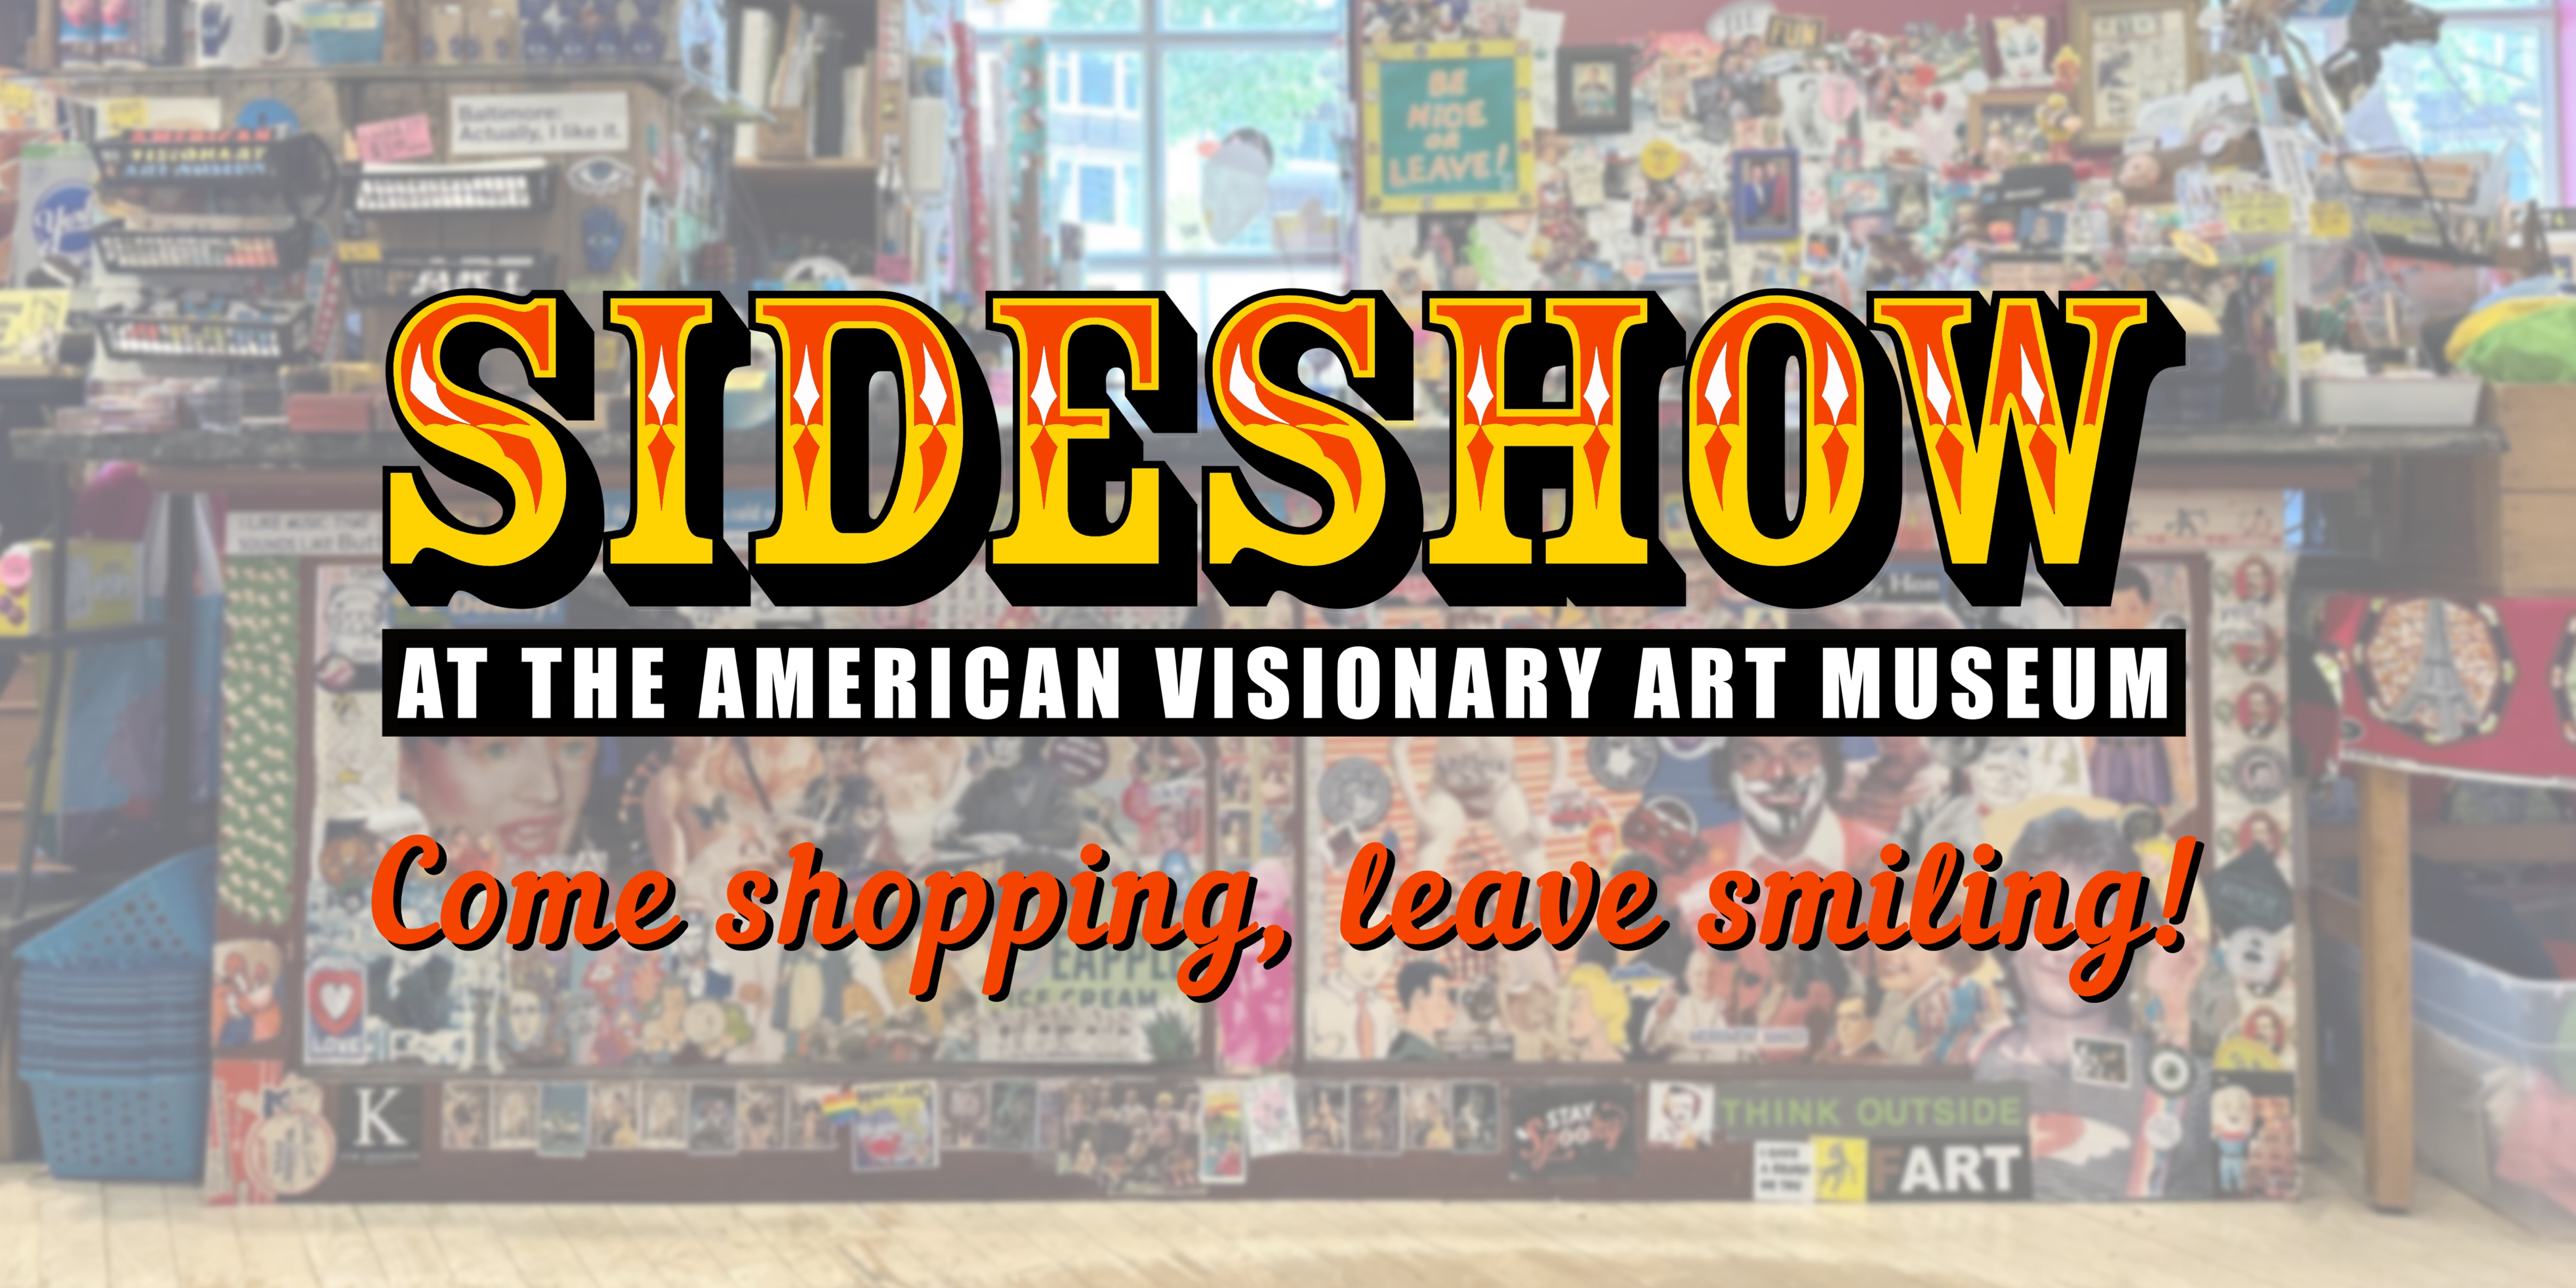 Sideshow at the American Visionary Art Museum. Come shopping, leave smiling!